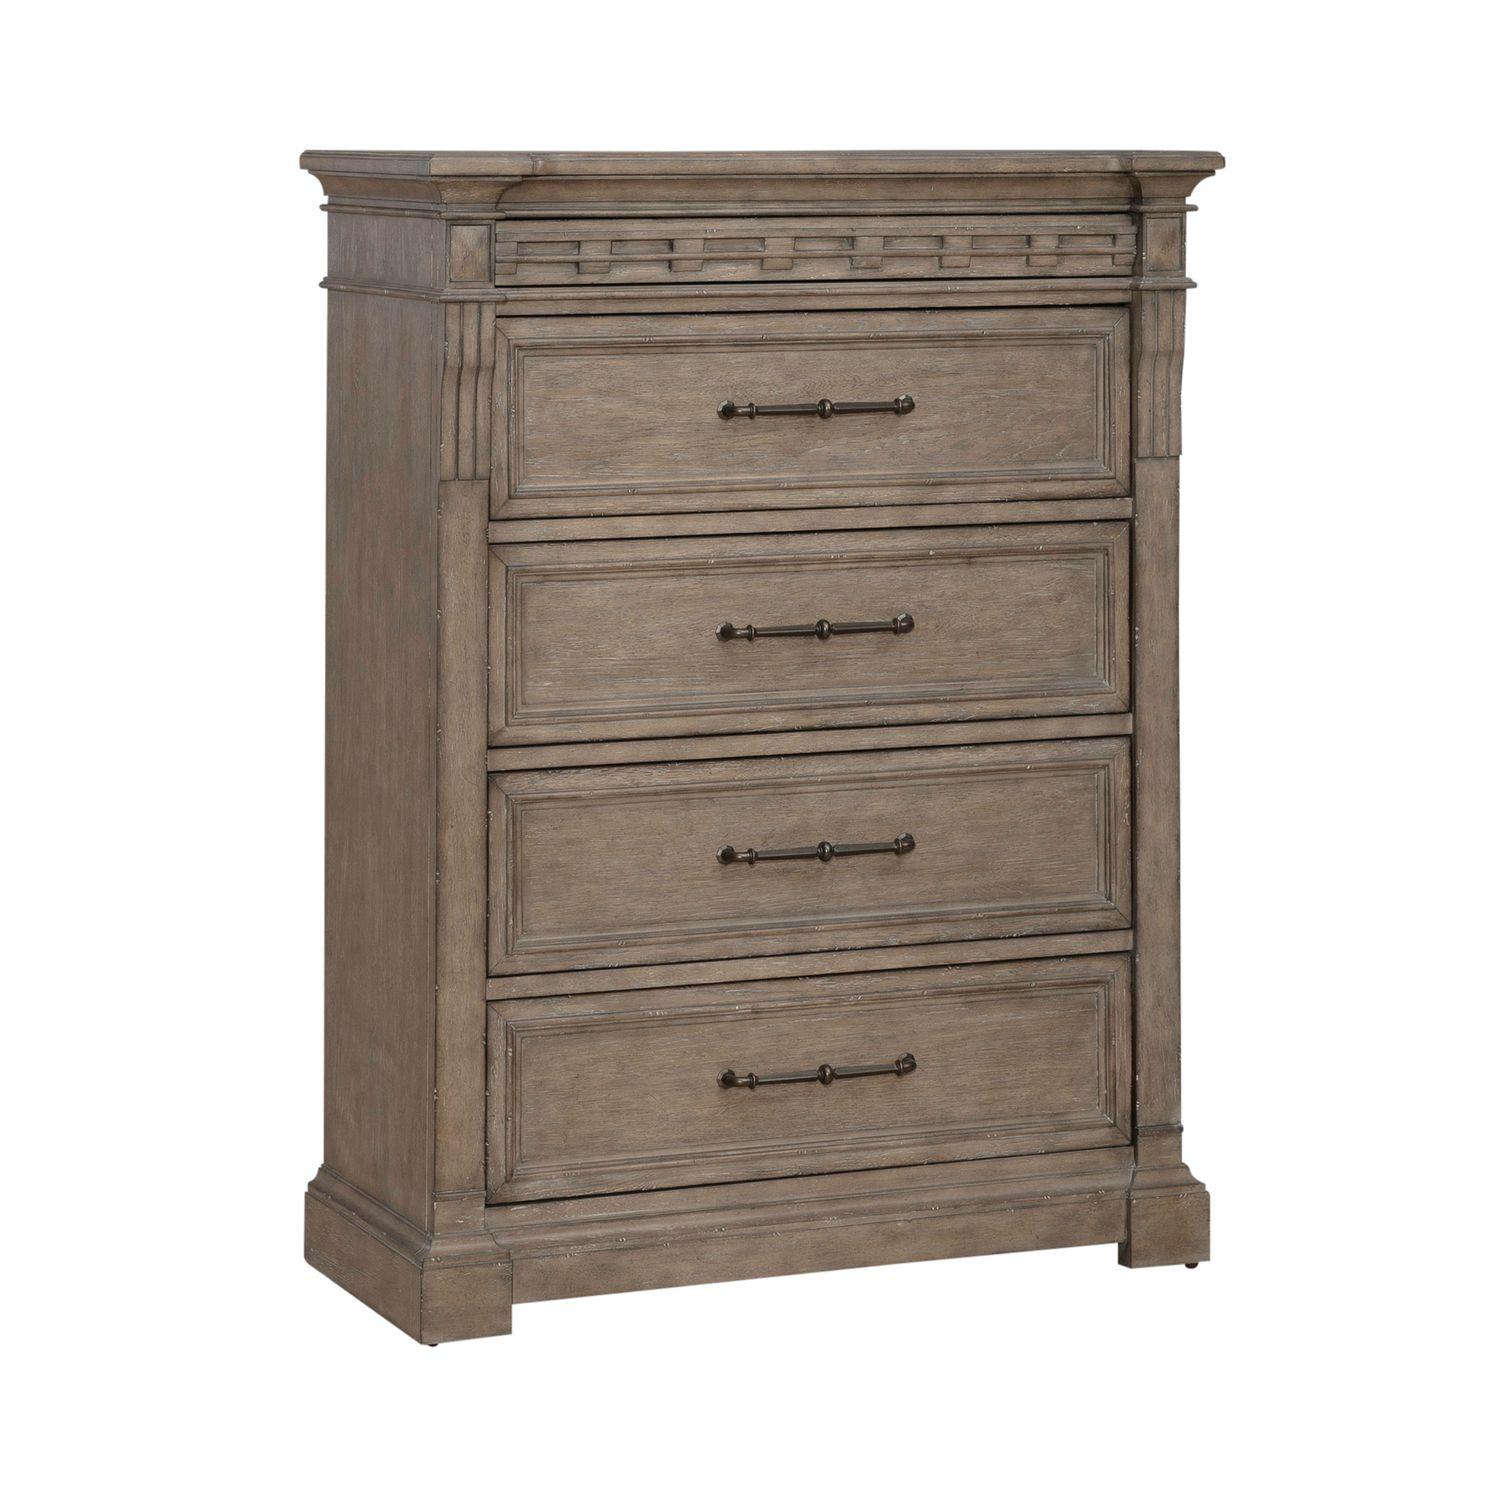 Transitional Chest Town & Country (711-BR) 711-BR41 in Taupe 